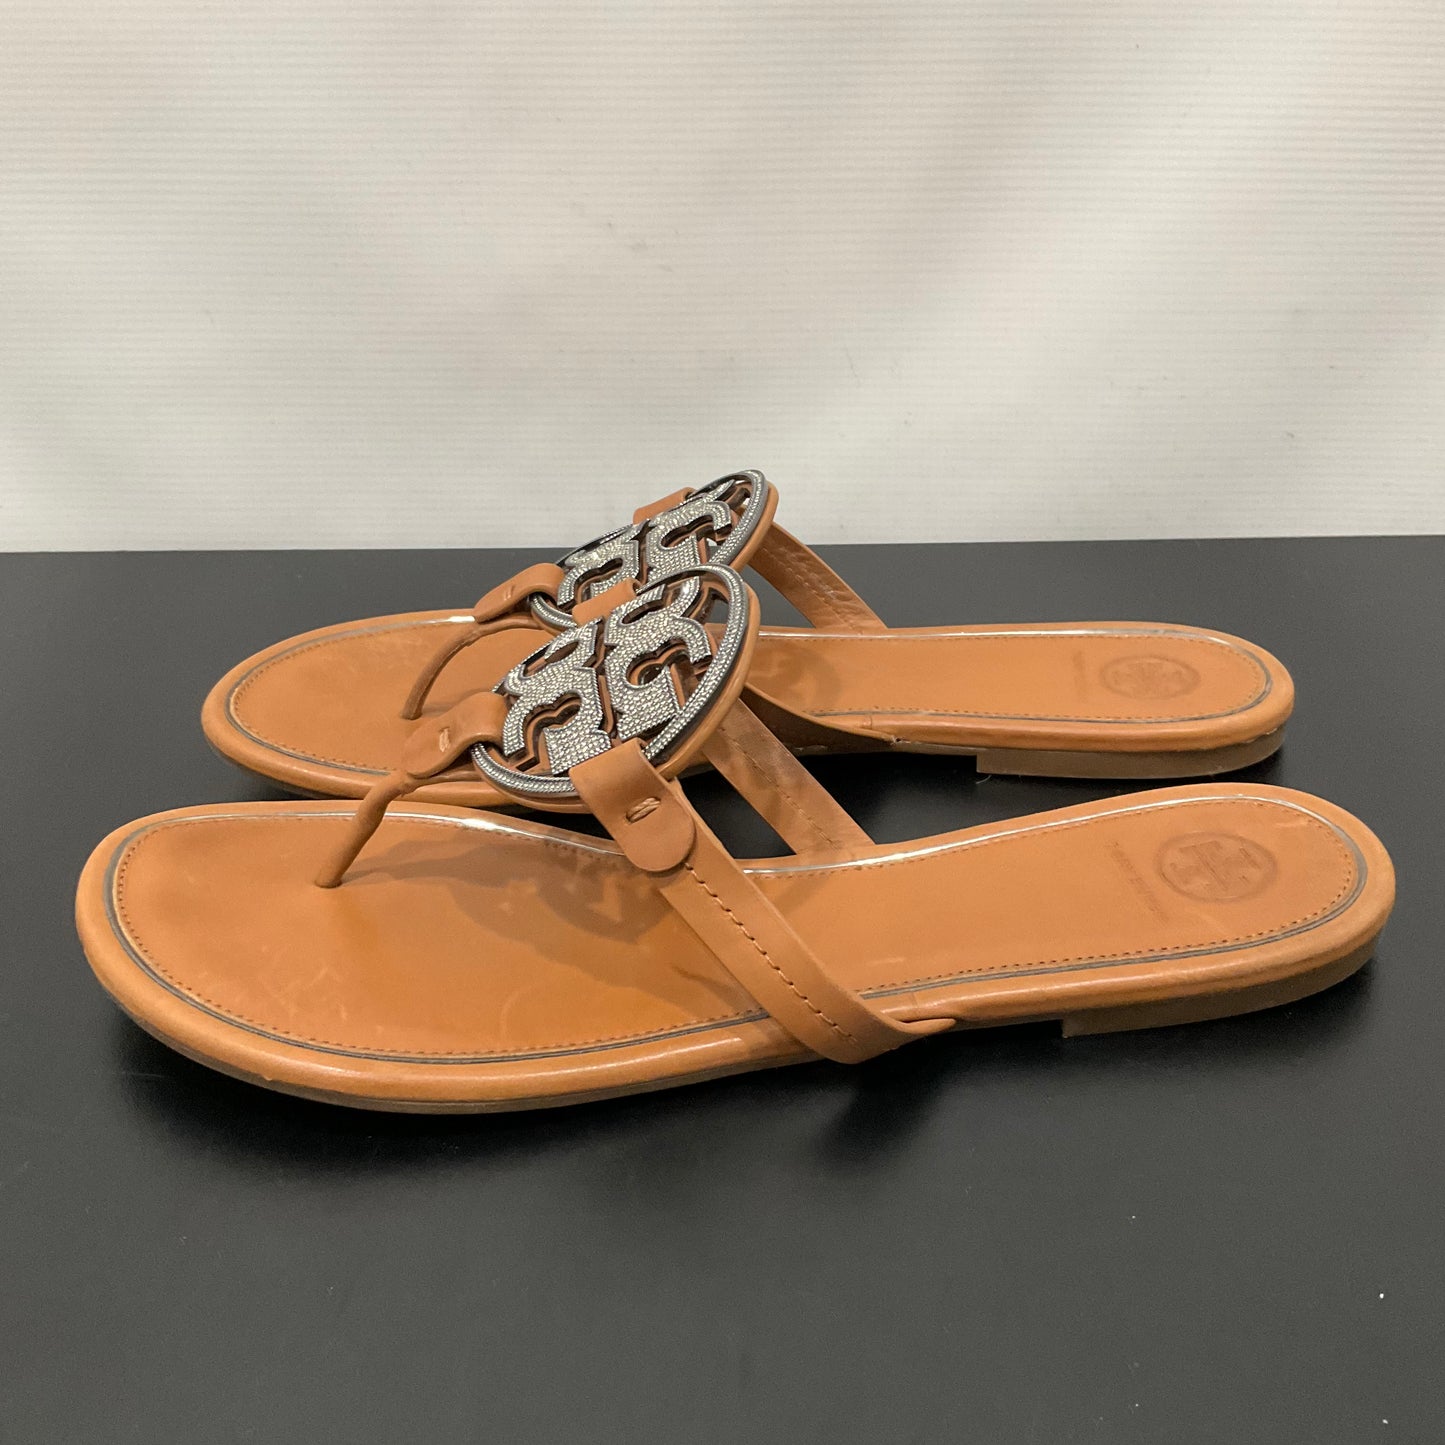 Sandals Flats By Tory Burch  Size: 11